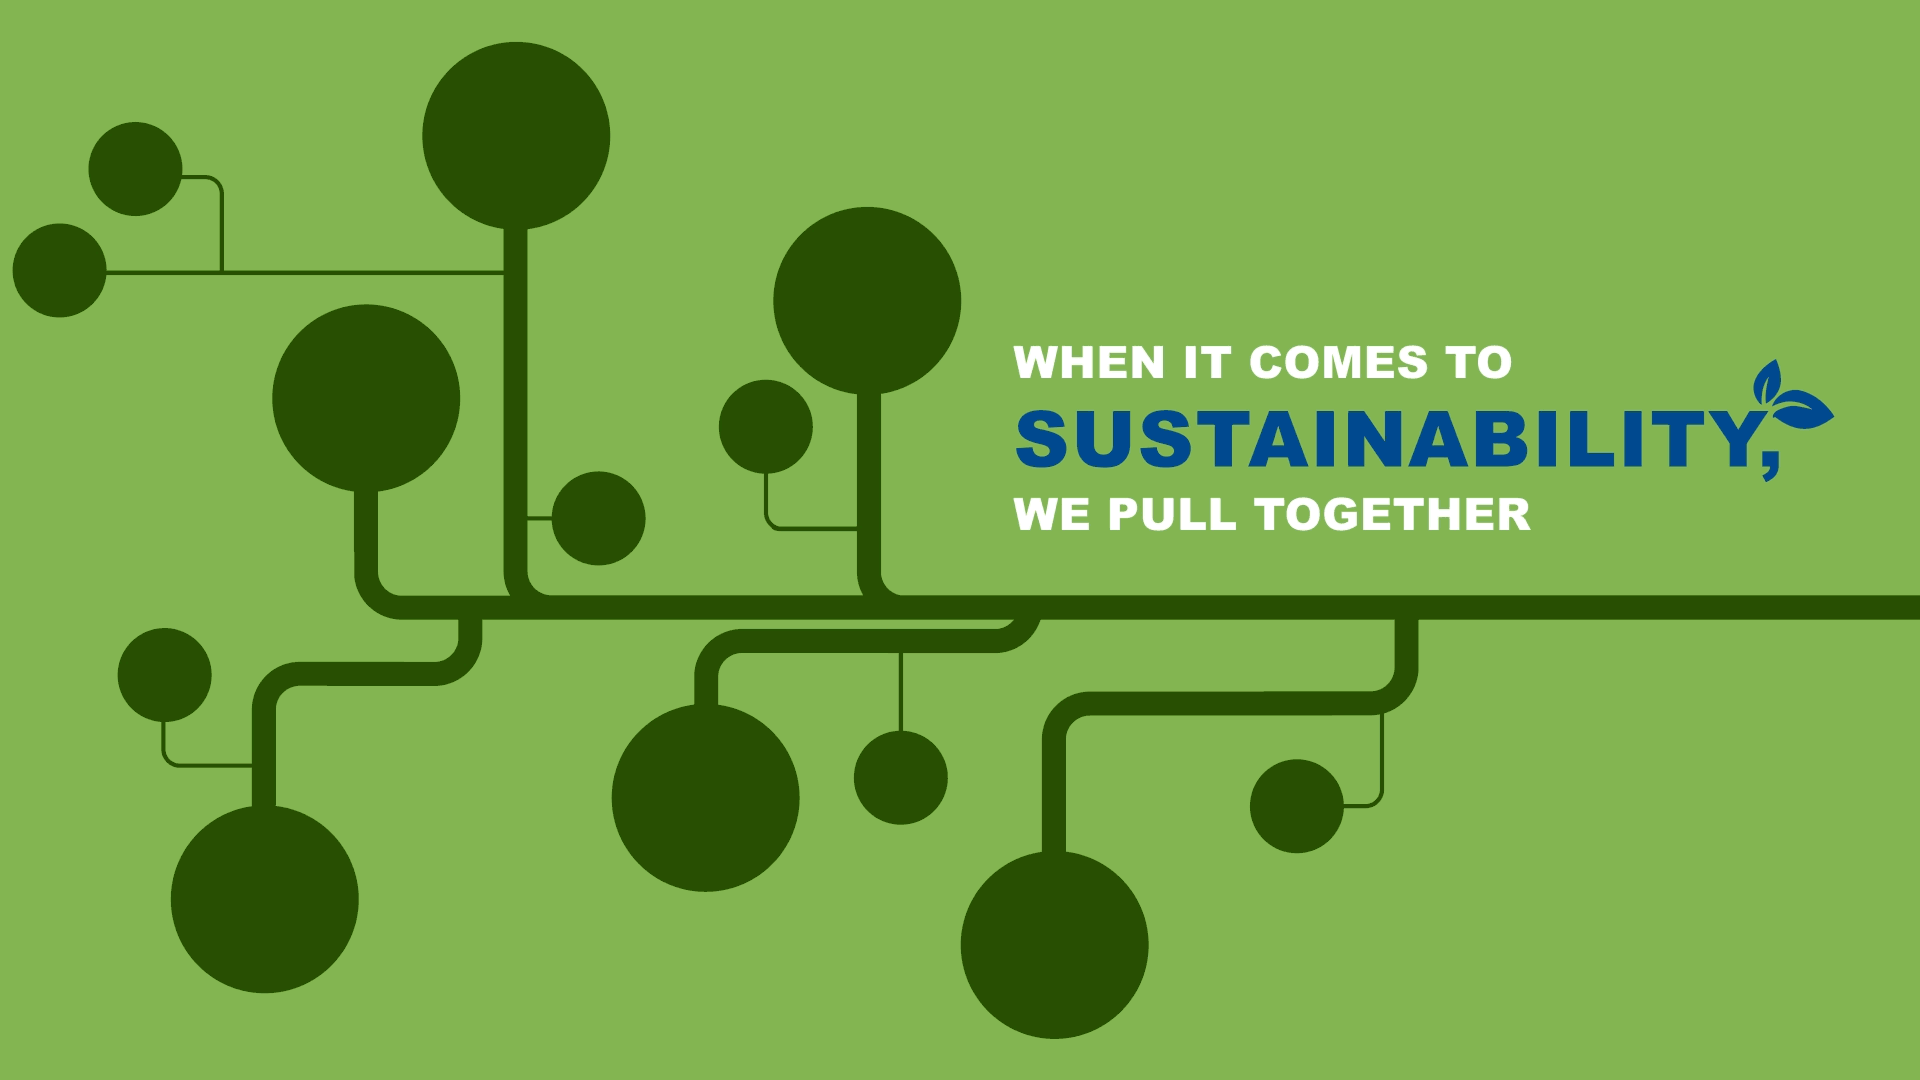 When it comes to sustainability, we pull together